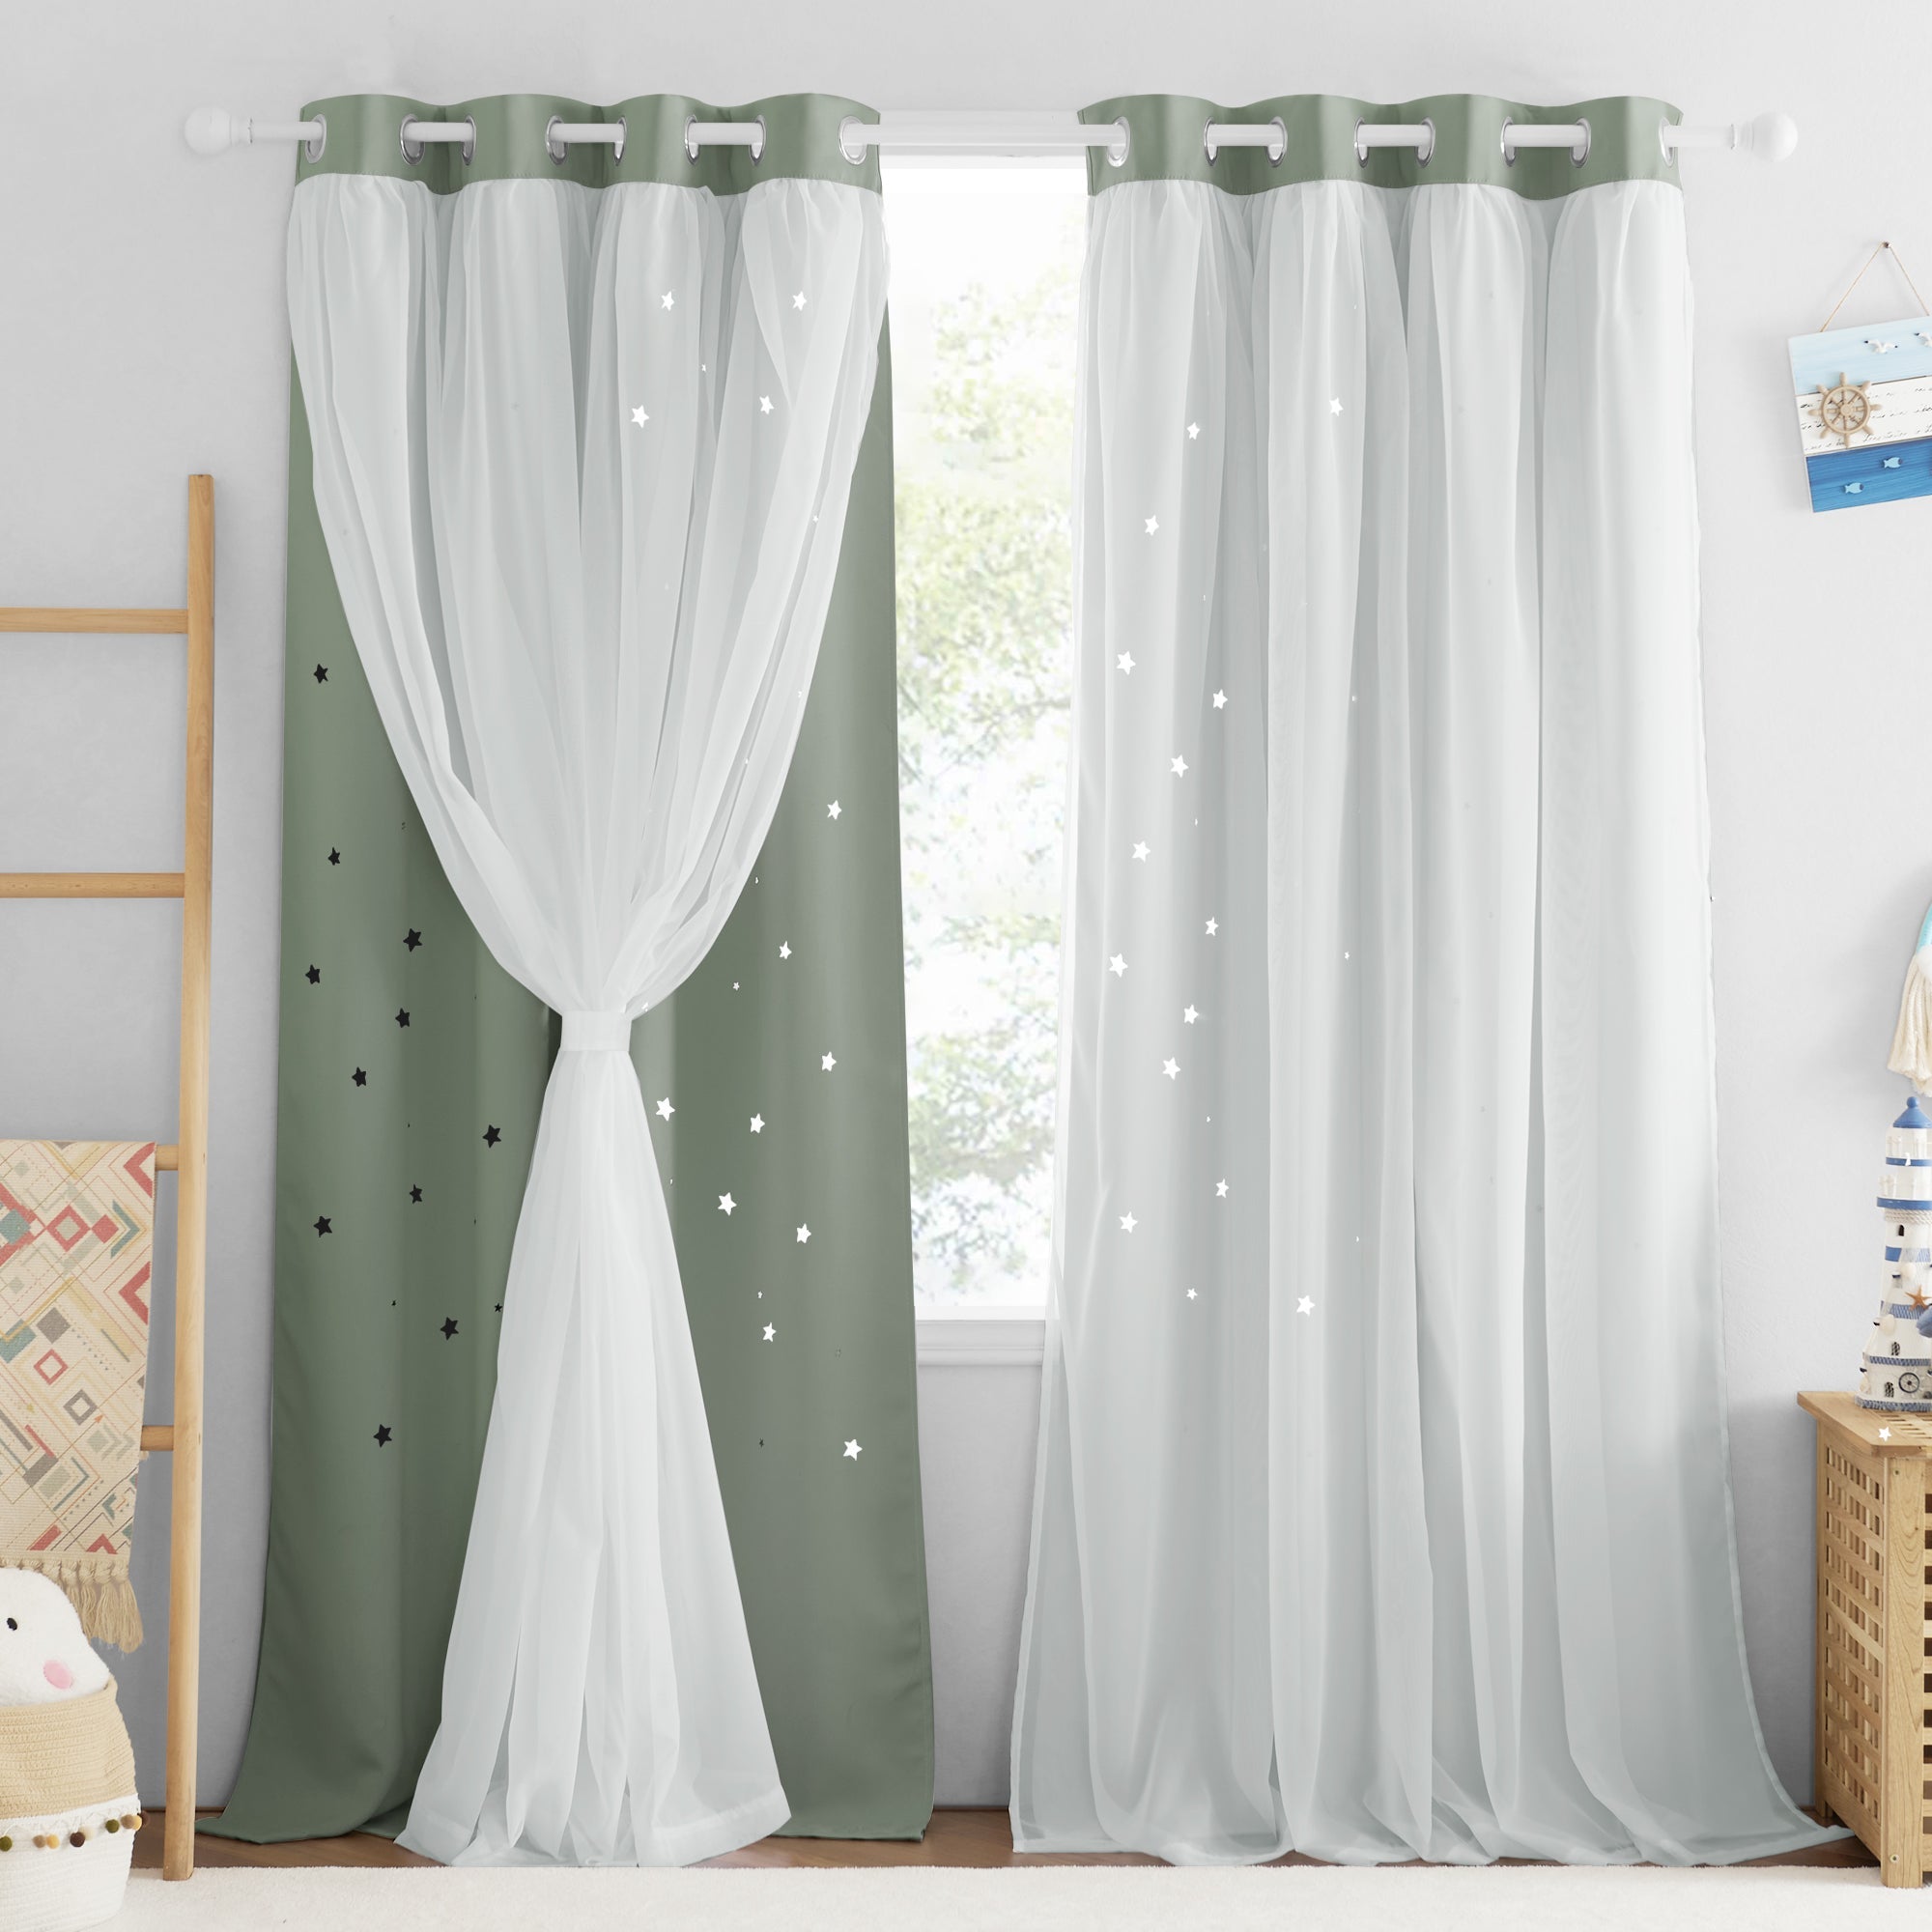 Star Cut Out Blackout Curtain With Sheer Voile Curtain Overlay  2 Panels KGORGE Store